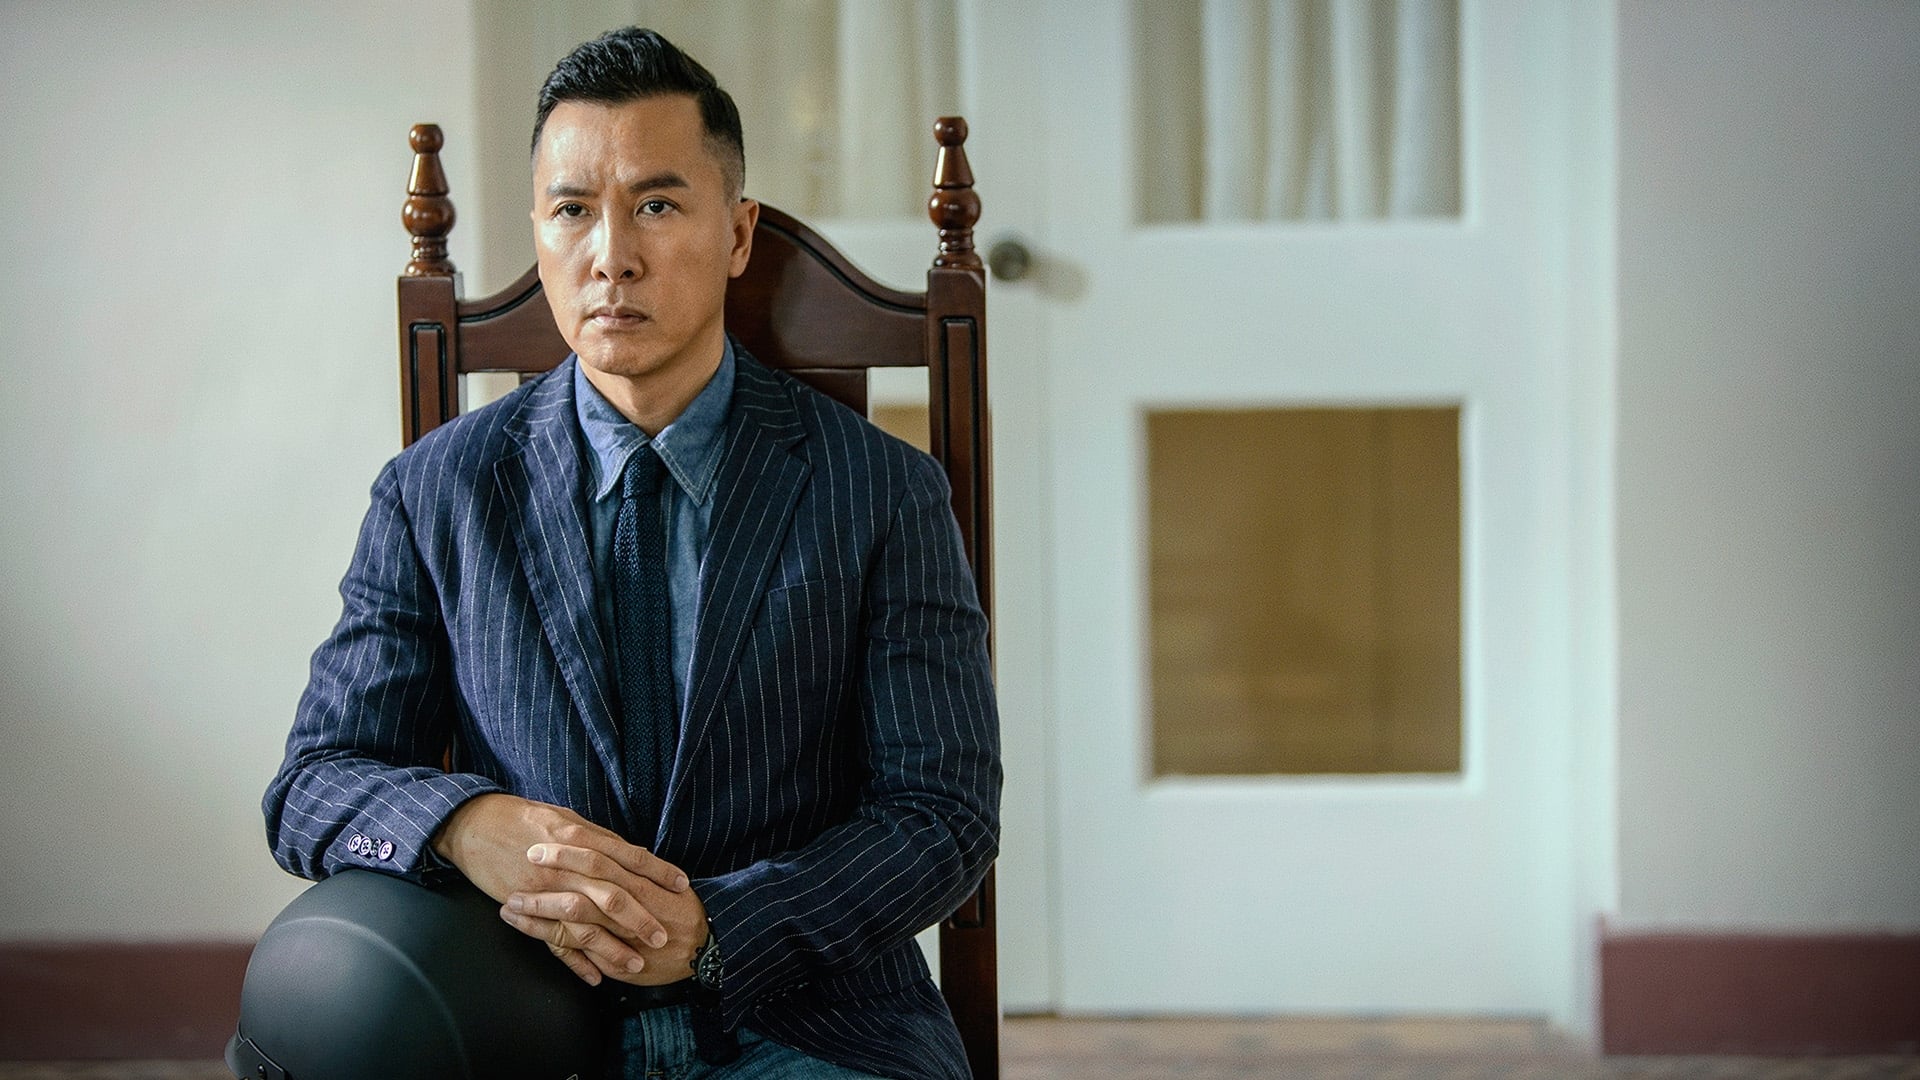 big brother 2018 donnie yen full movie online cantonese